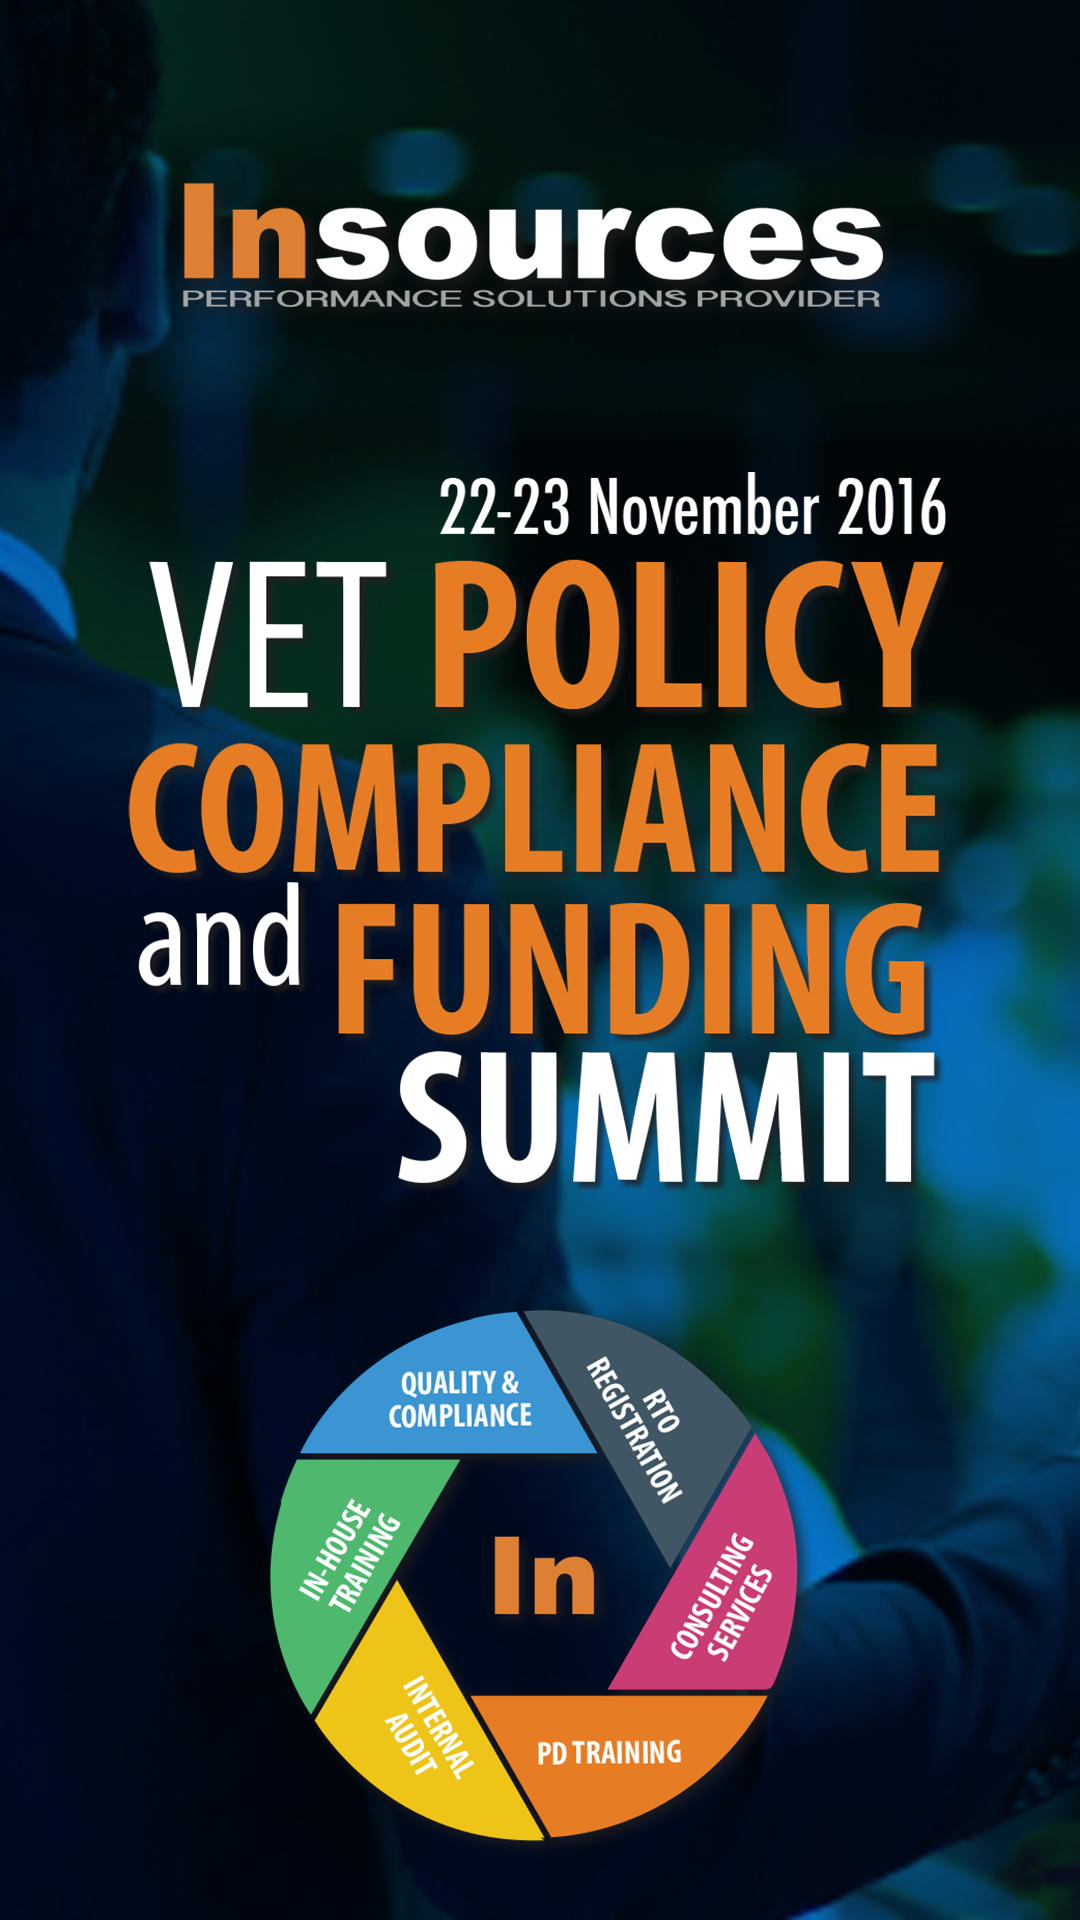 10 reasons why VET practitioners should attend the VET Compliance Summit